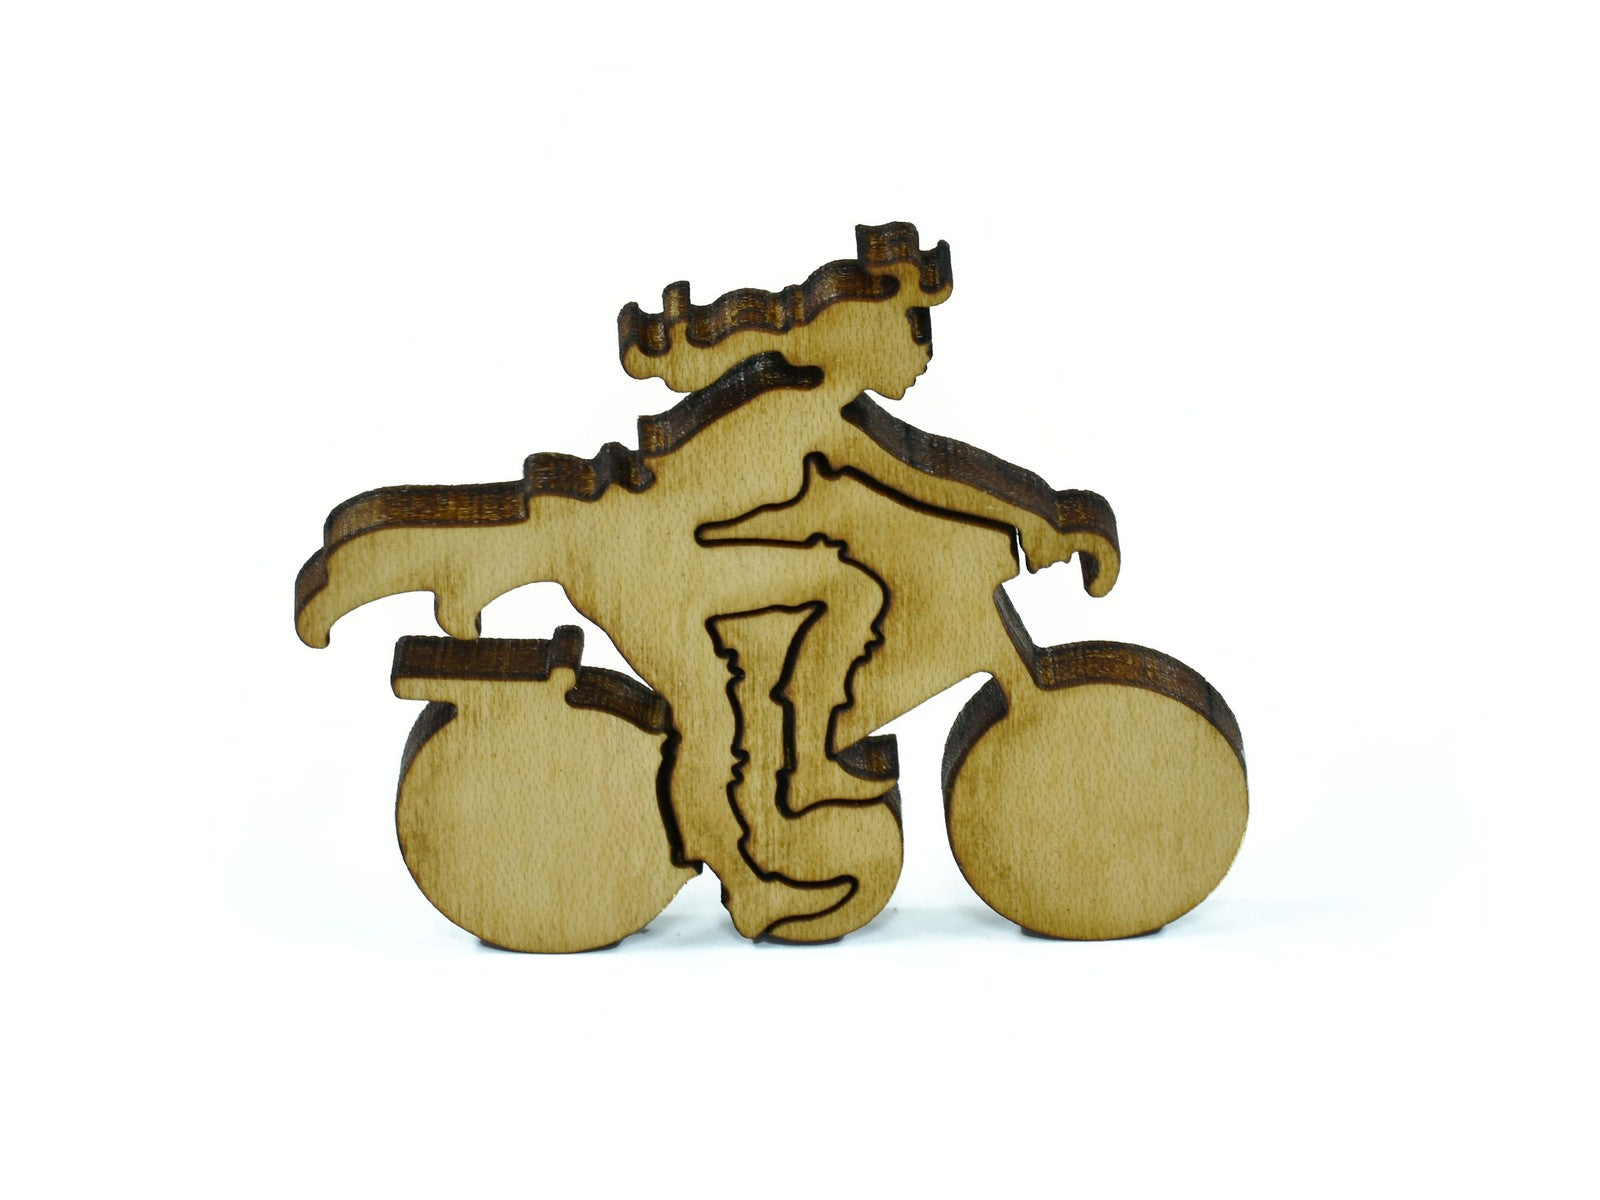 A closeup of pieces in the shape of a person riding a bicycle.